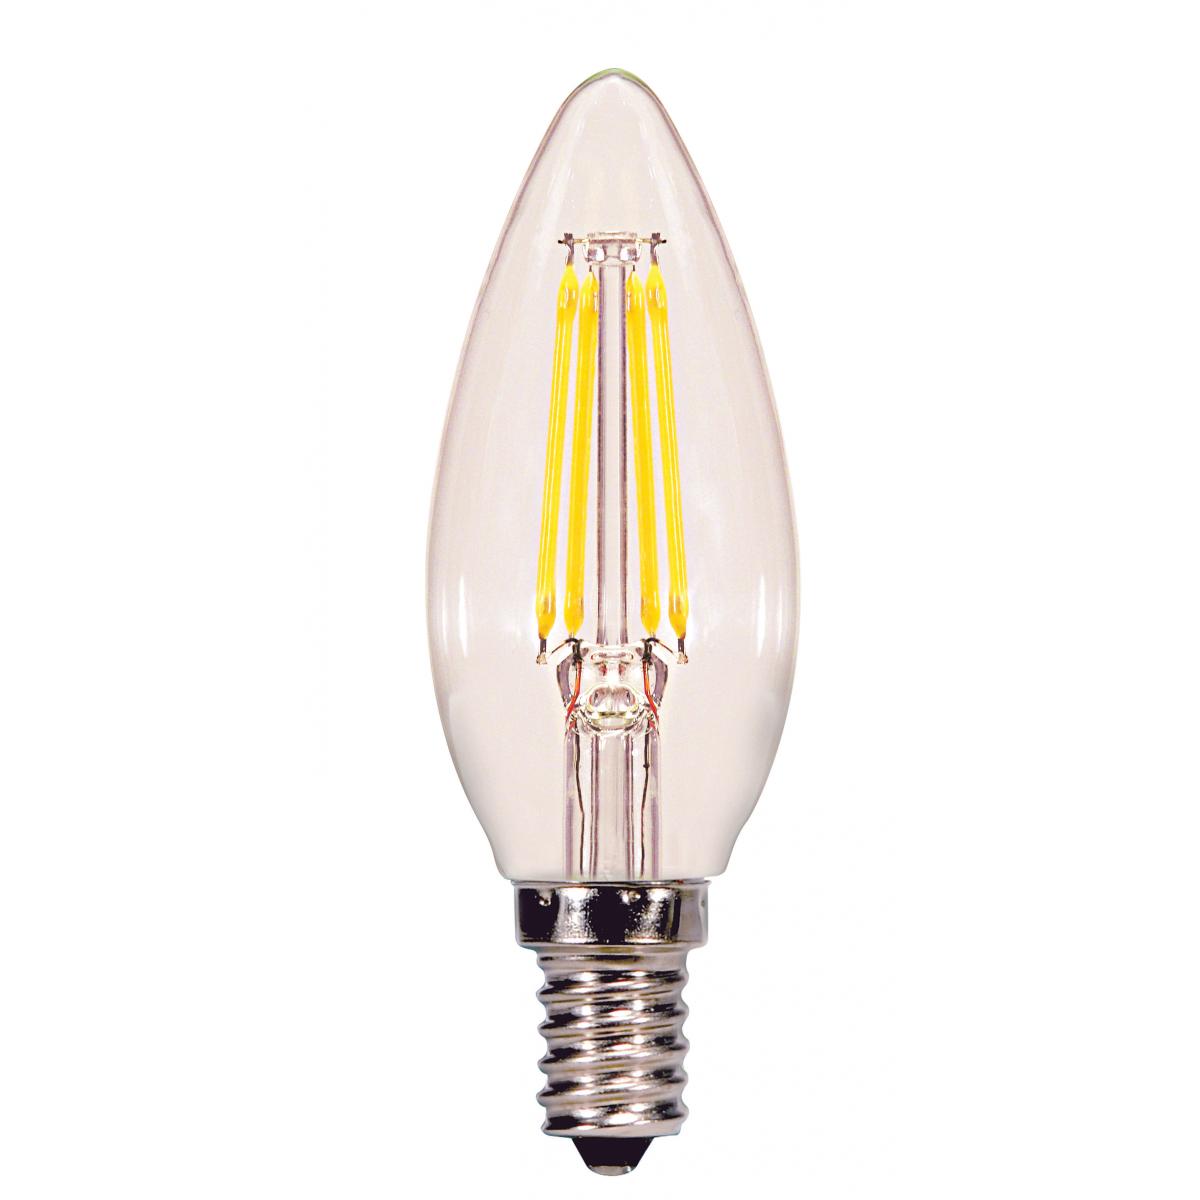 Replacement for Satco S21702 4.5 Watt B11 LED Clear Candelabra base 2700K 350 Lumens 120 Volt 2-Card - NOW S21819